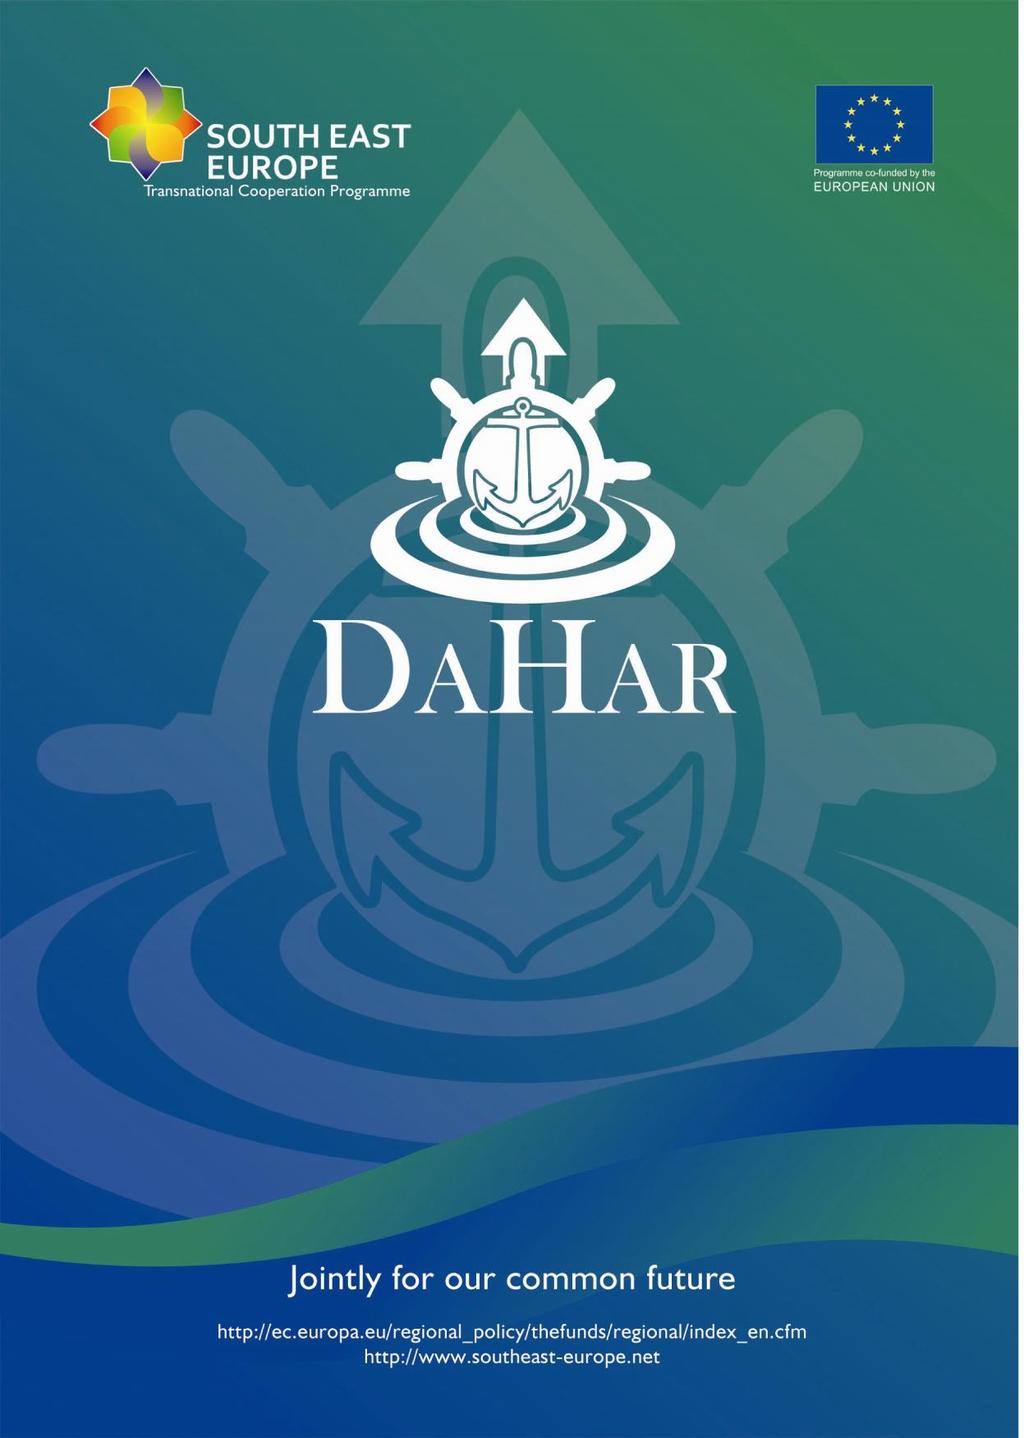 The European Union's Southeast Europe programme supporting DaHar Danube Inland Harbour Development DaHar WP 4 A4: Local Action Plan of the Port